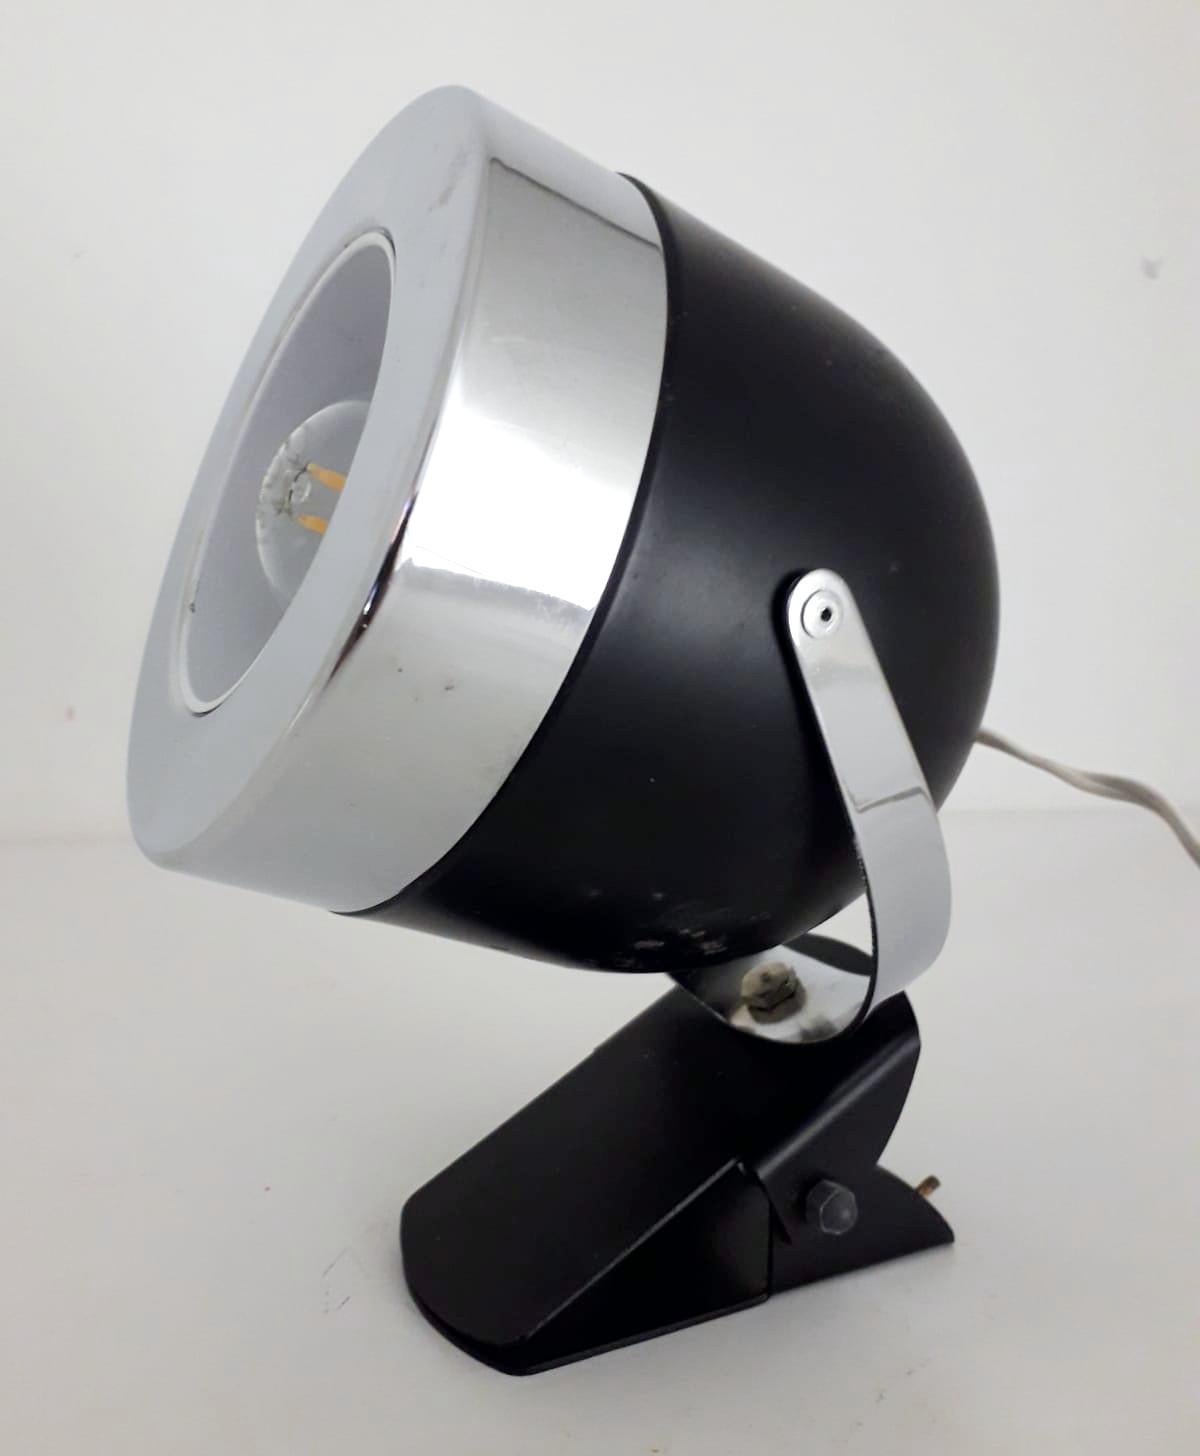 Vintage Italian adjustable spotlight with matte black enameled body and chrome hardware, mounted with simple clip base, can be used as wall light or table lamp / Made in Italy circa 1970s
1 light / E14 type / max 40W
Measures: Height 7 inches /